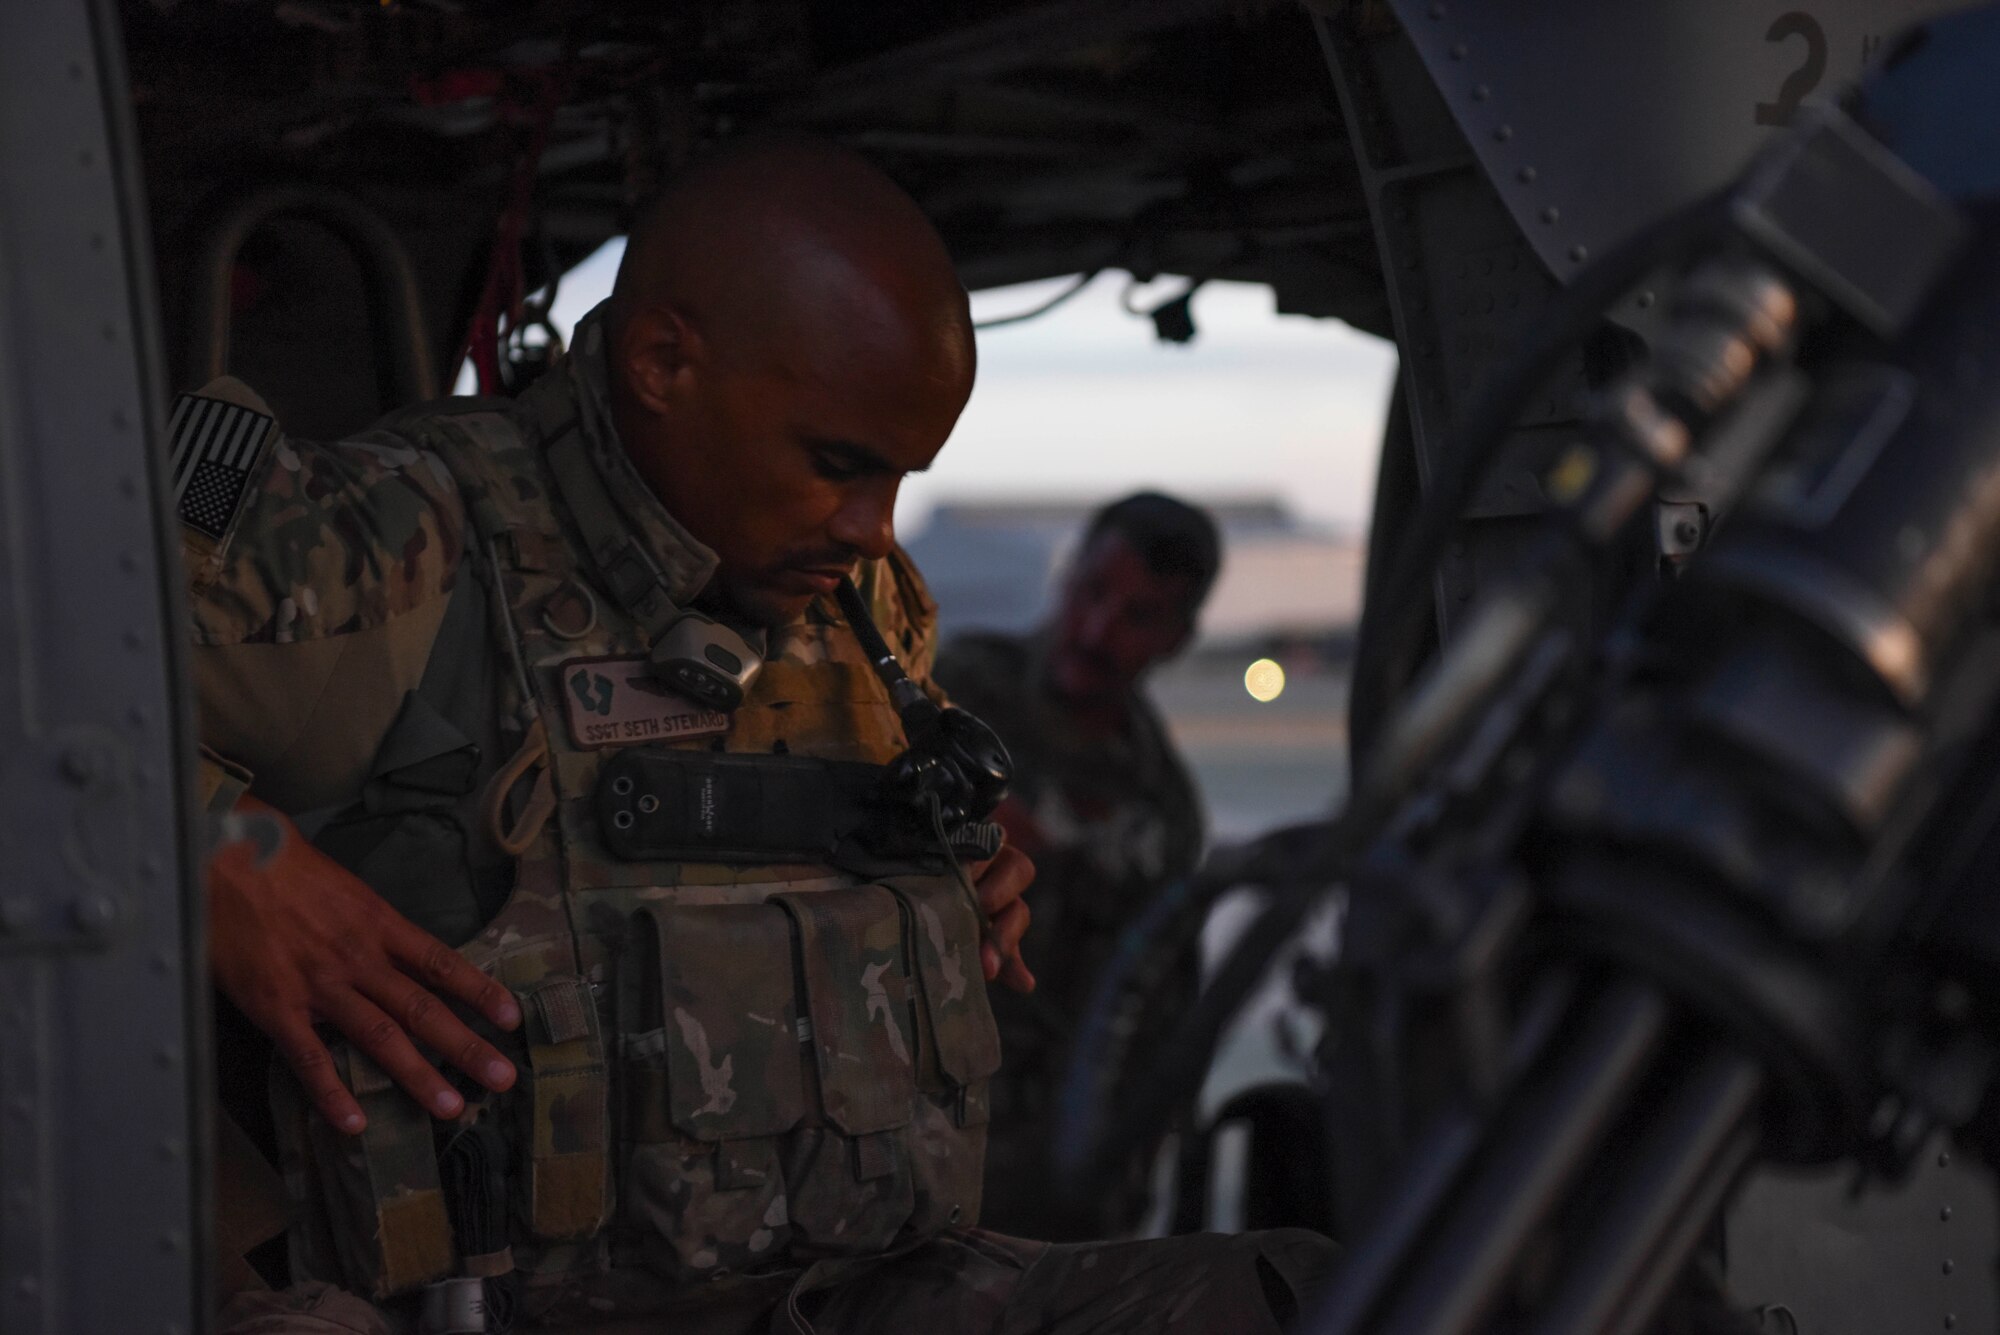 U.S. Air Force Staff Sgt. Seth Steward, 303rd Expeditionary Rescue Squadron special mission aviator, checks his harness prior to an exercise at Camp Simba, Kenya, March 24, 2021.